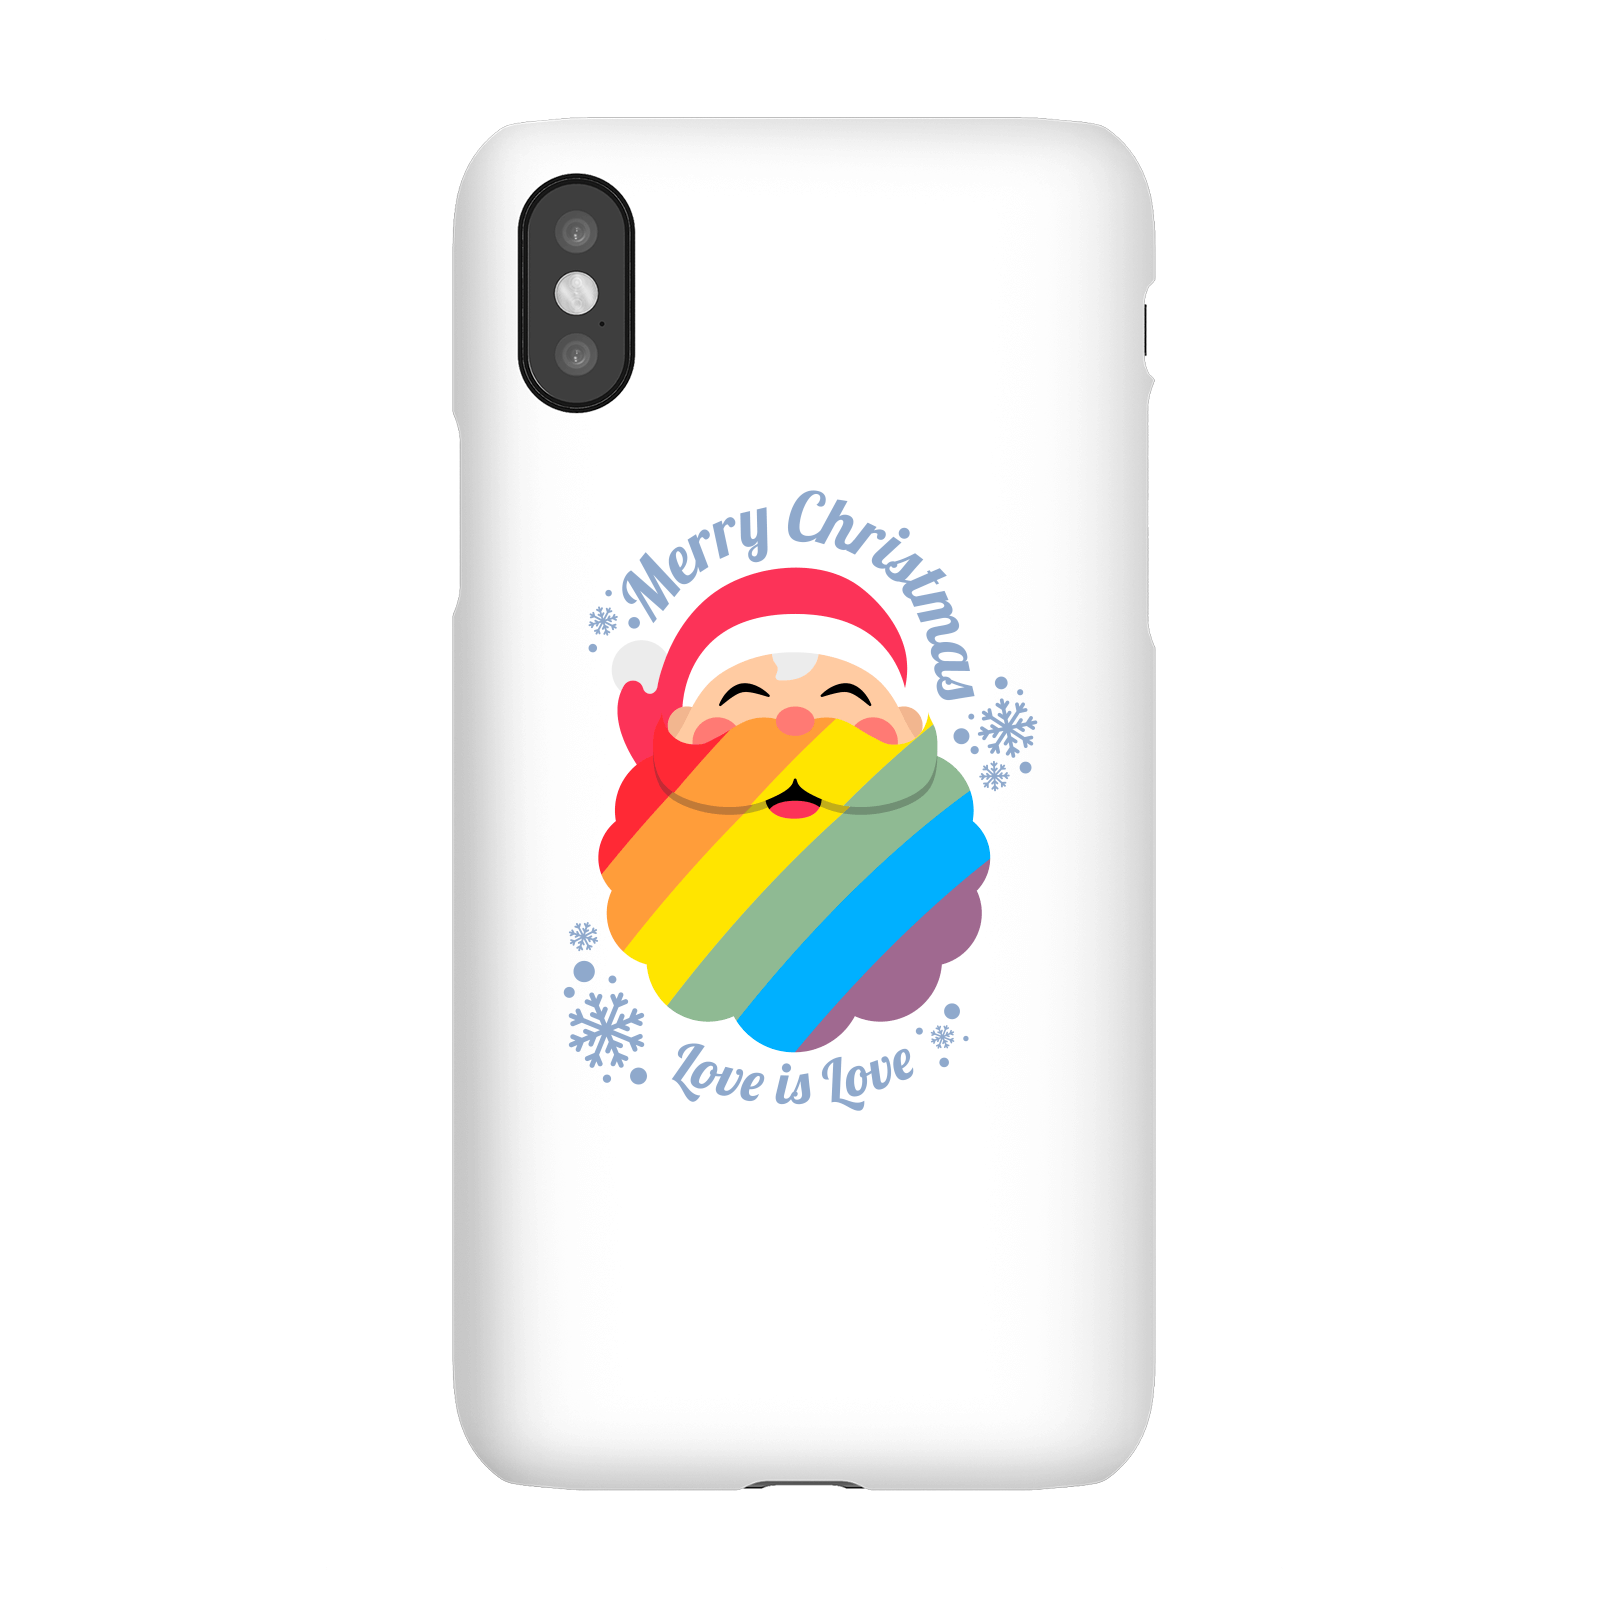 Christmas Pride Phone Case for iPhone and Android - iPhone 5/5s - Snap Case - Matte